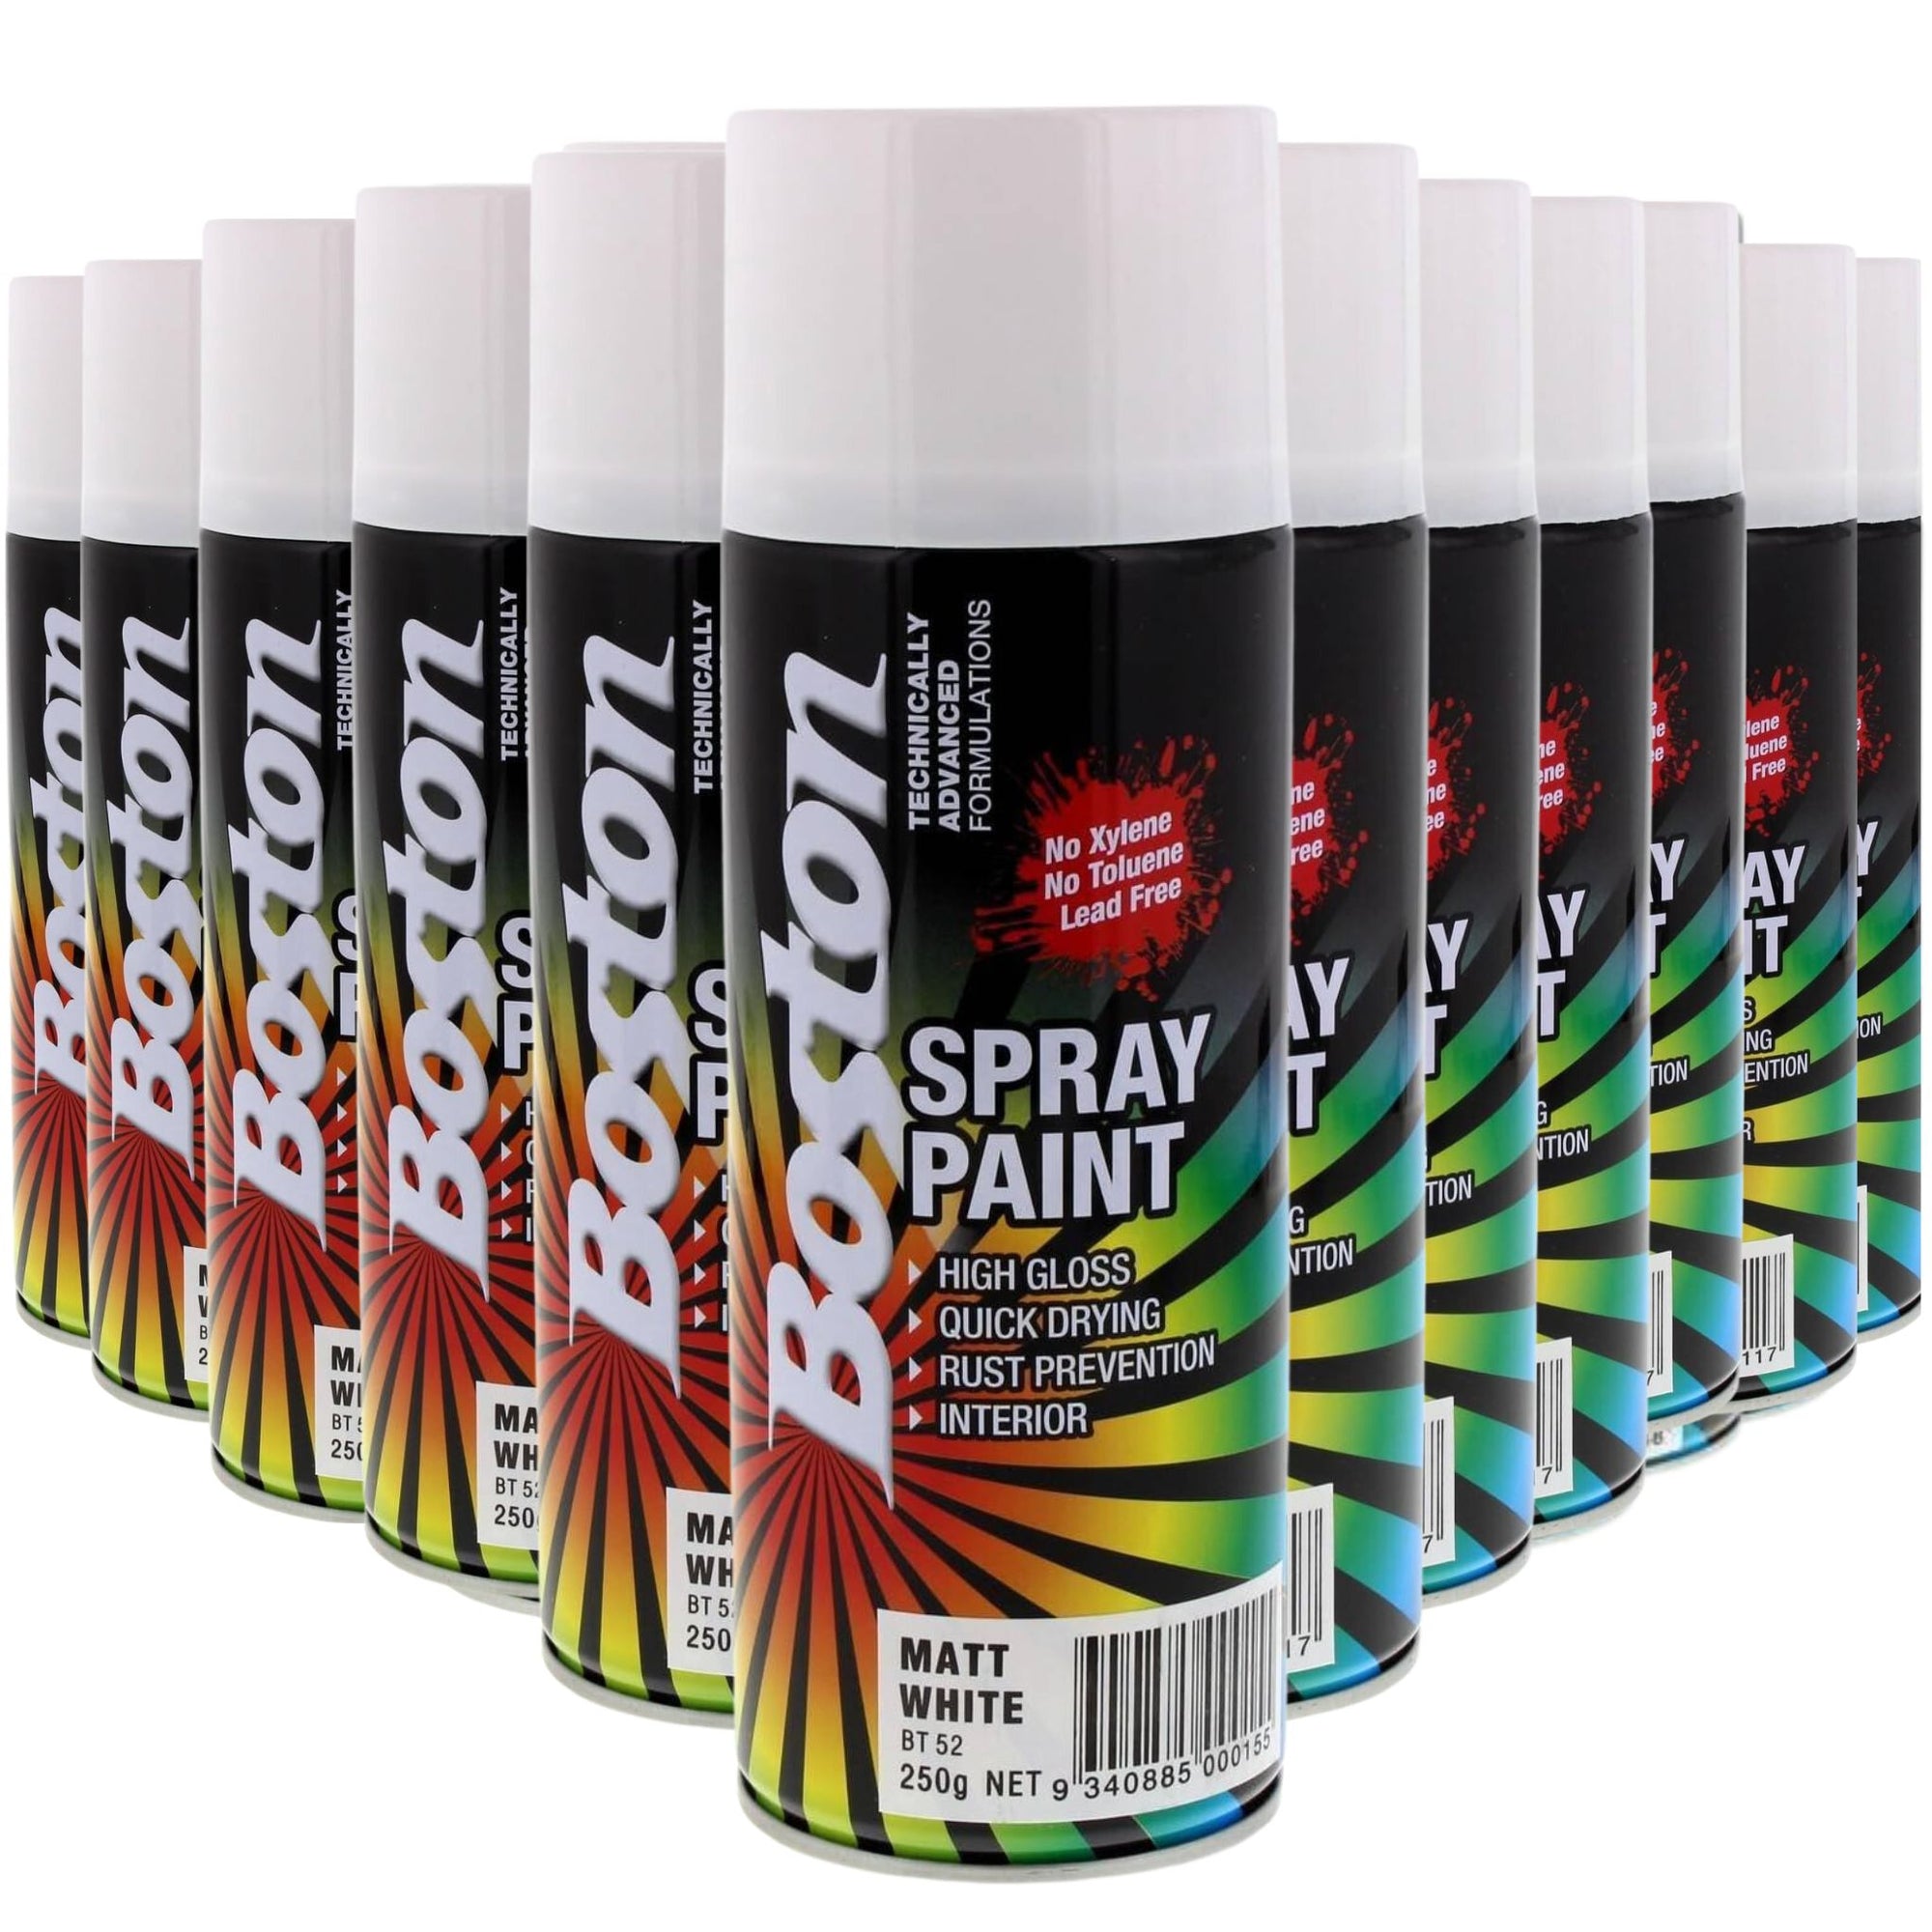 12 Cans | Boston Spray Paint Matt White 250g - South East Clearance Centre